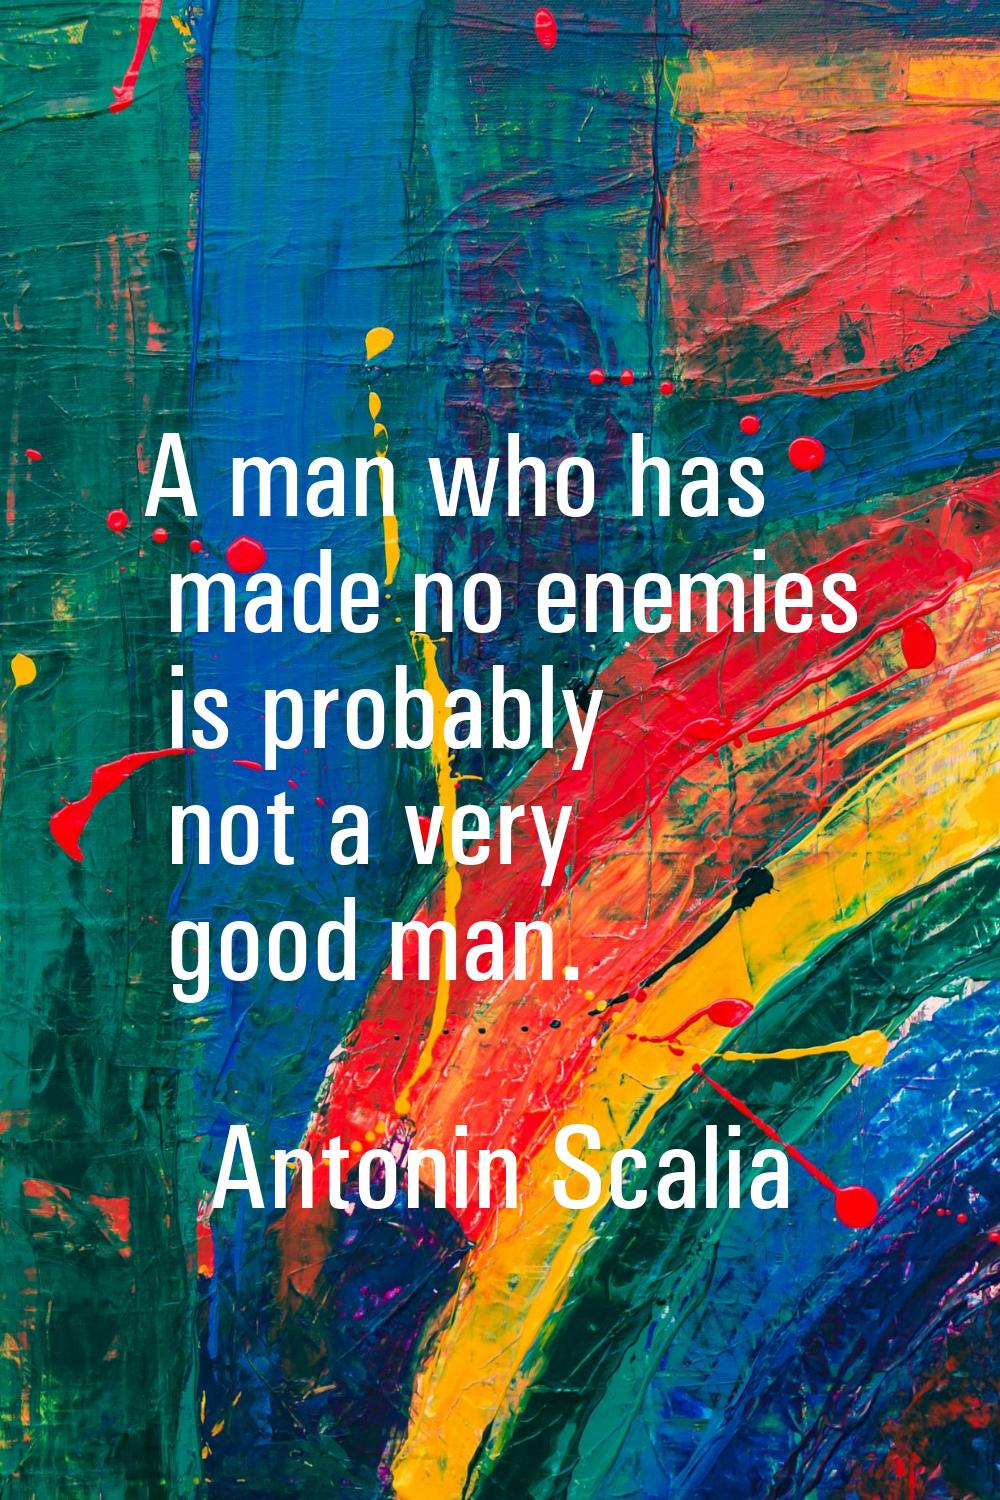 A man who has made no enemies is probably not a very good man.